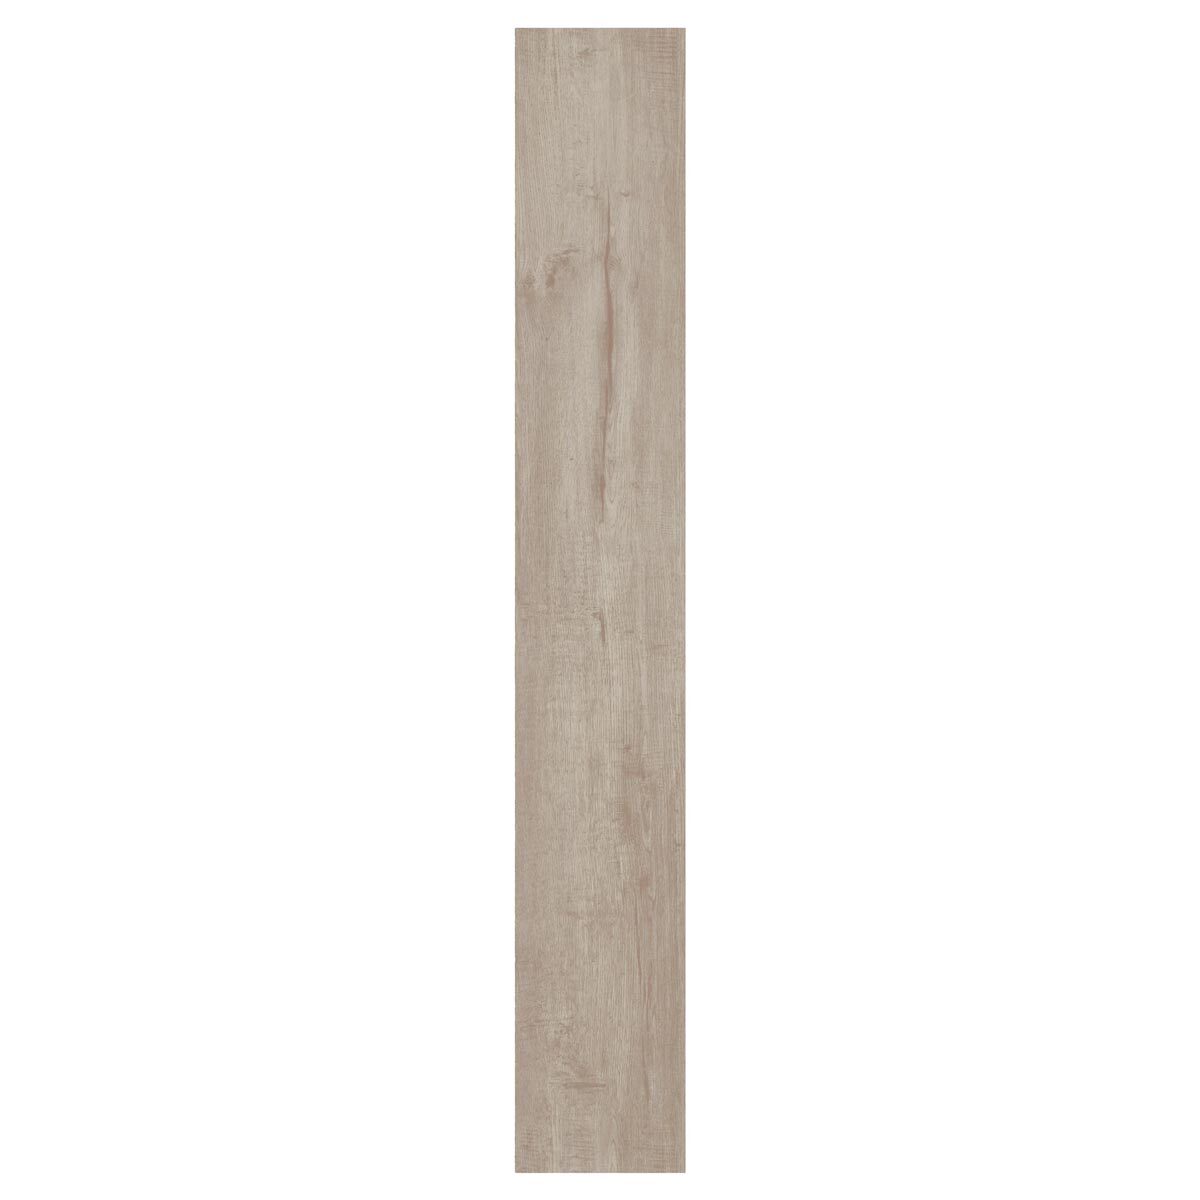 Individual plank of flooring on white background